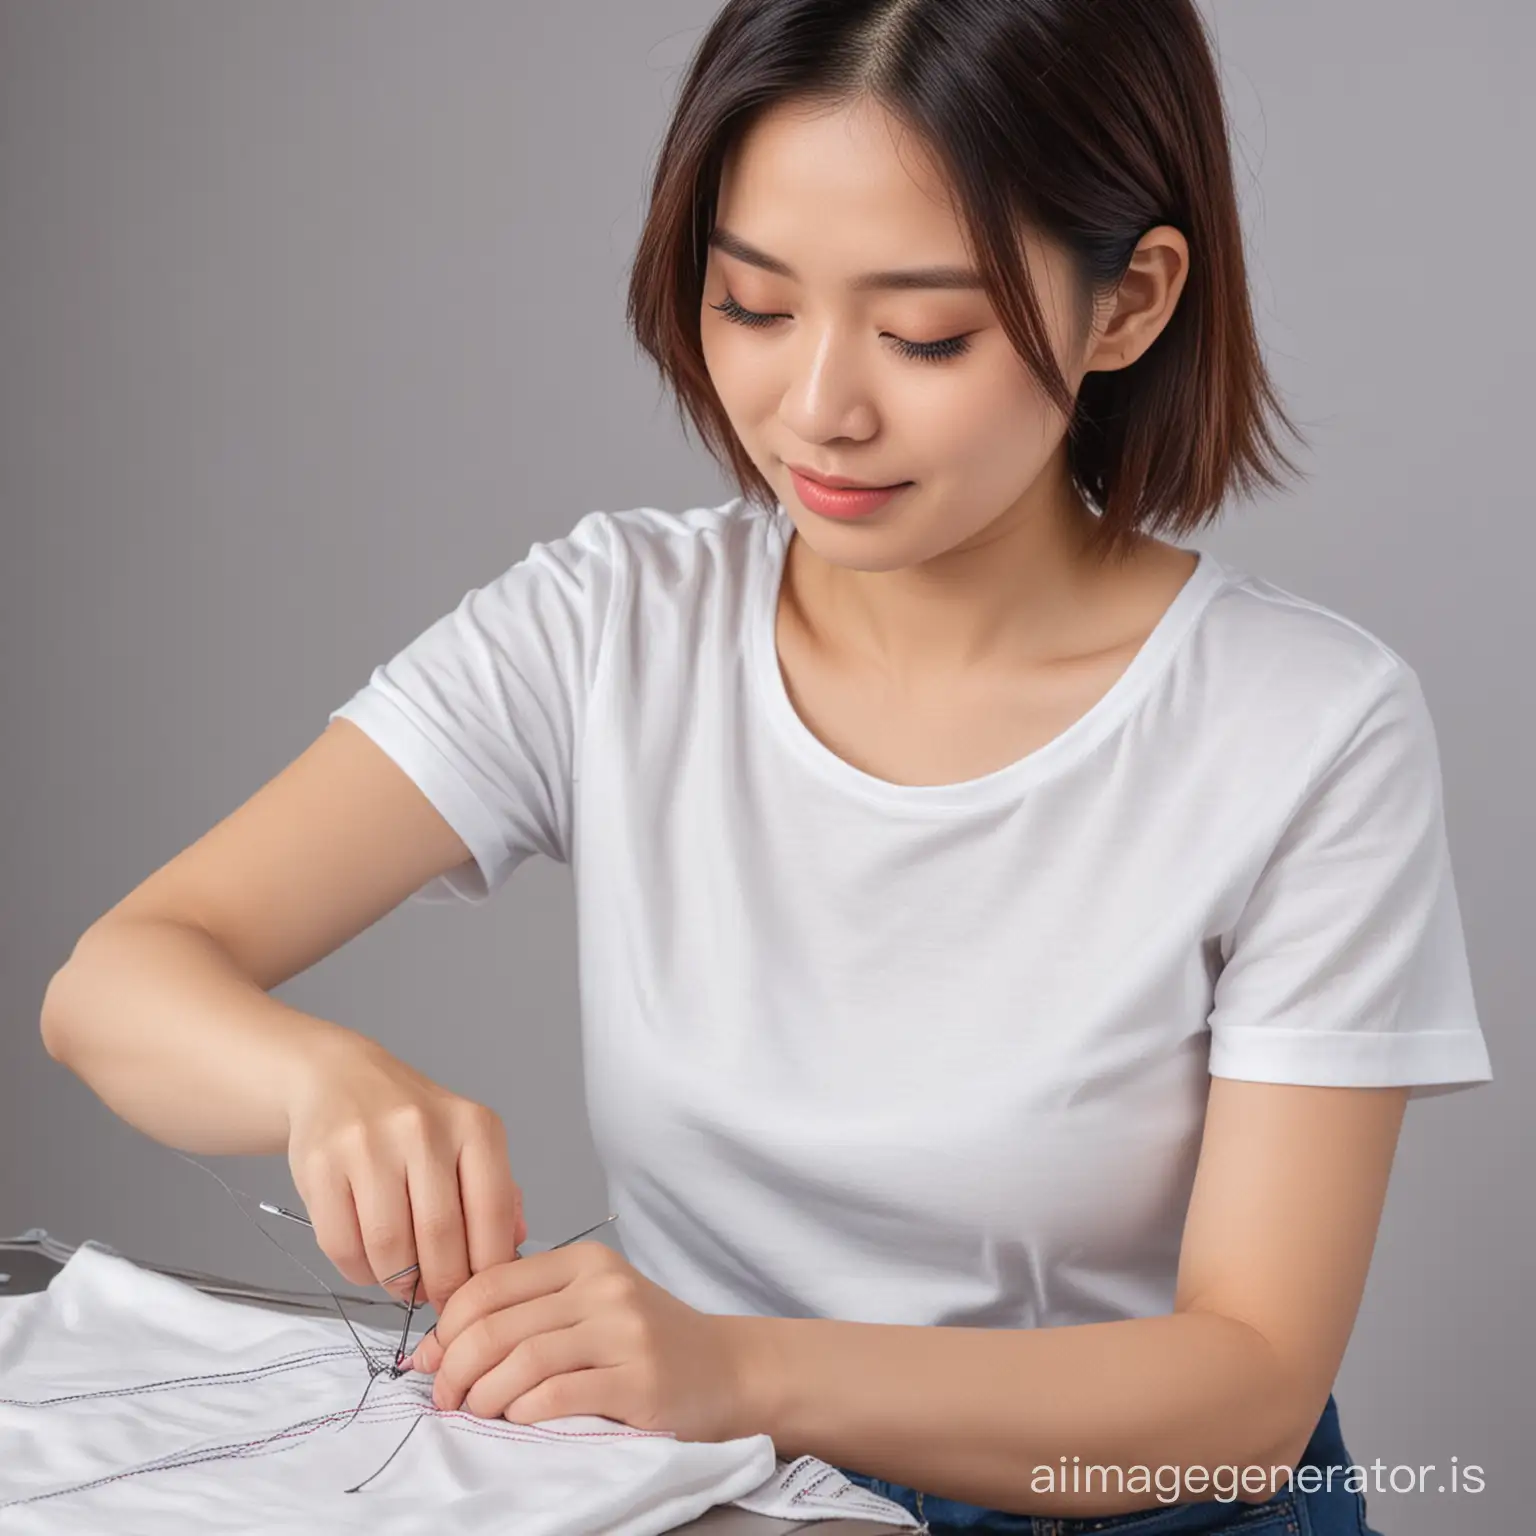 Asian women sewing tshirt with needle, female tailor